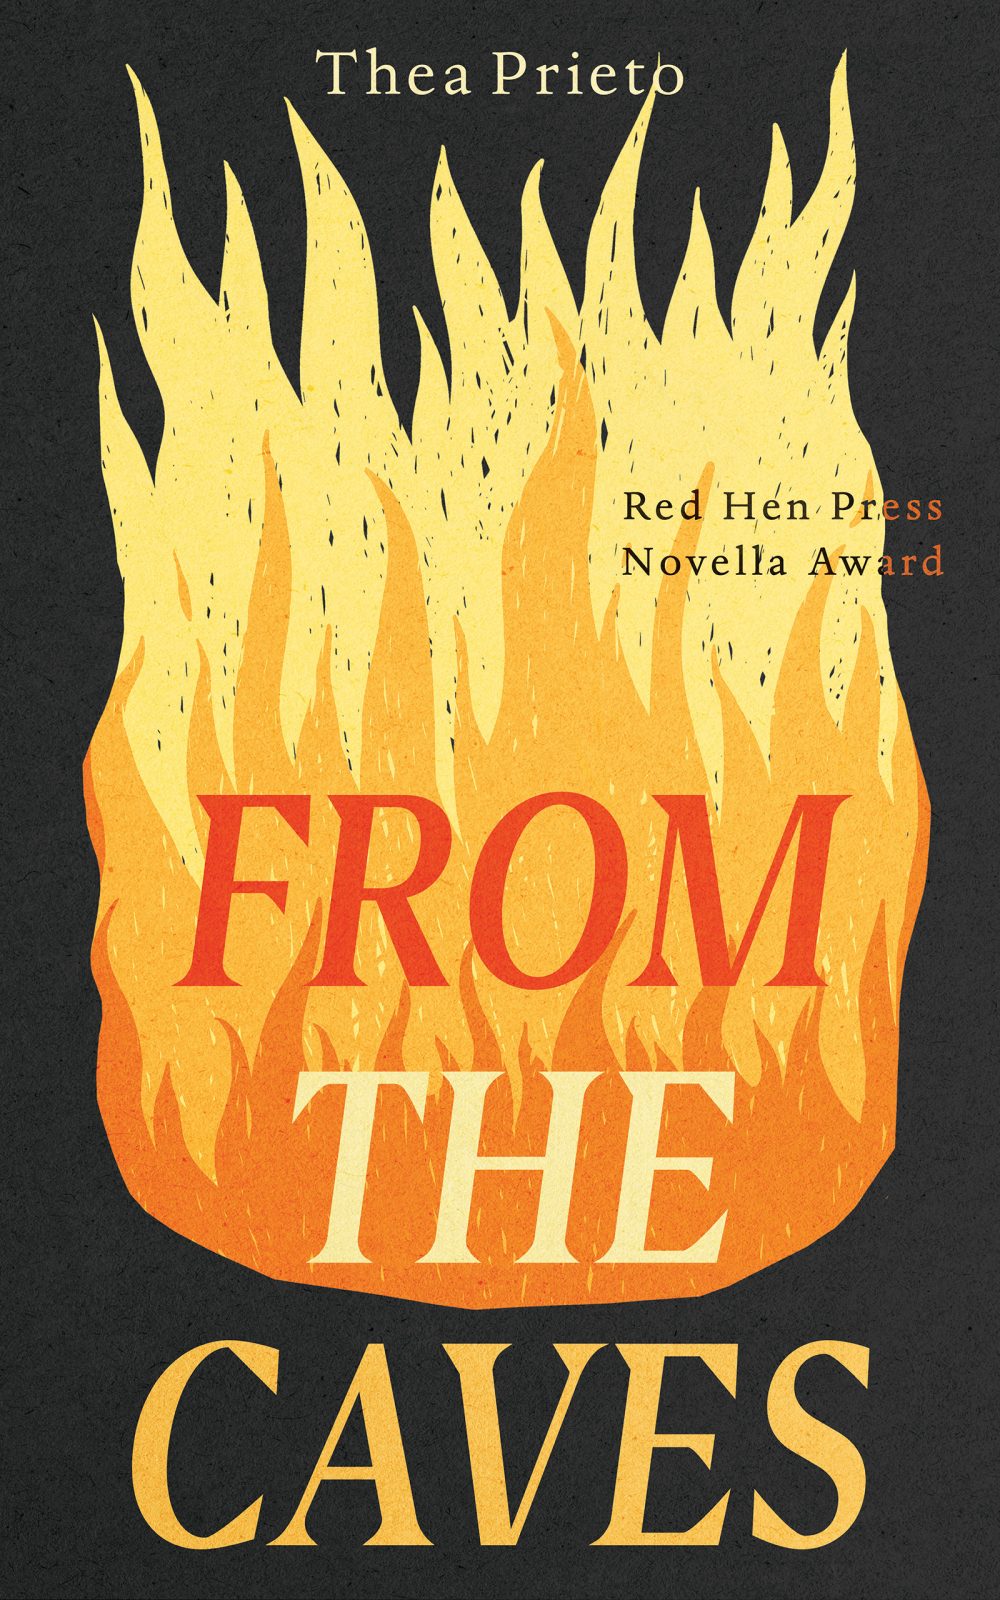 Book Cover with the text "From the Caves" and a picture of flames with a black background